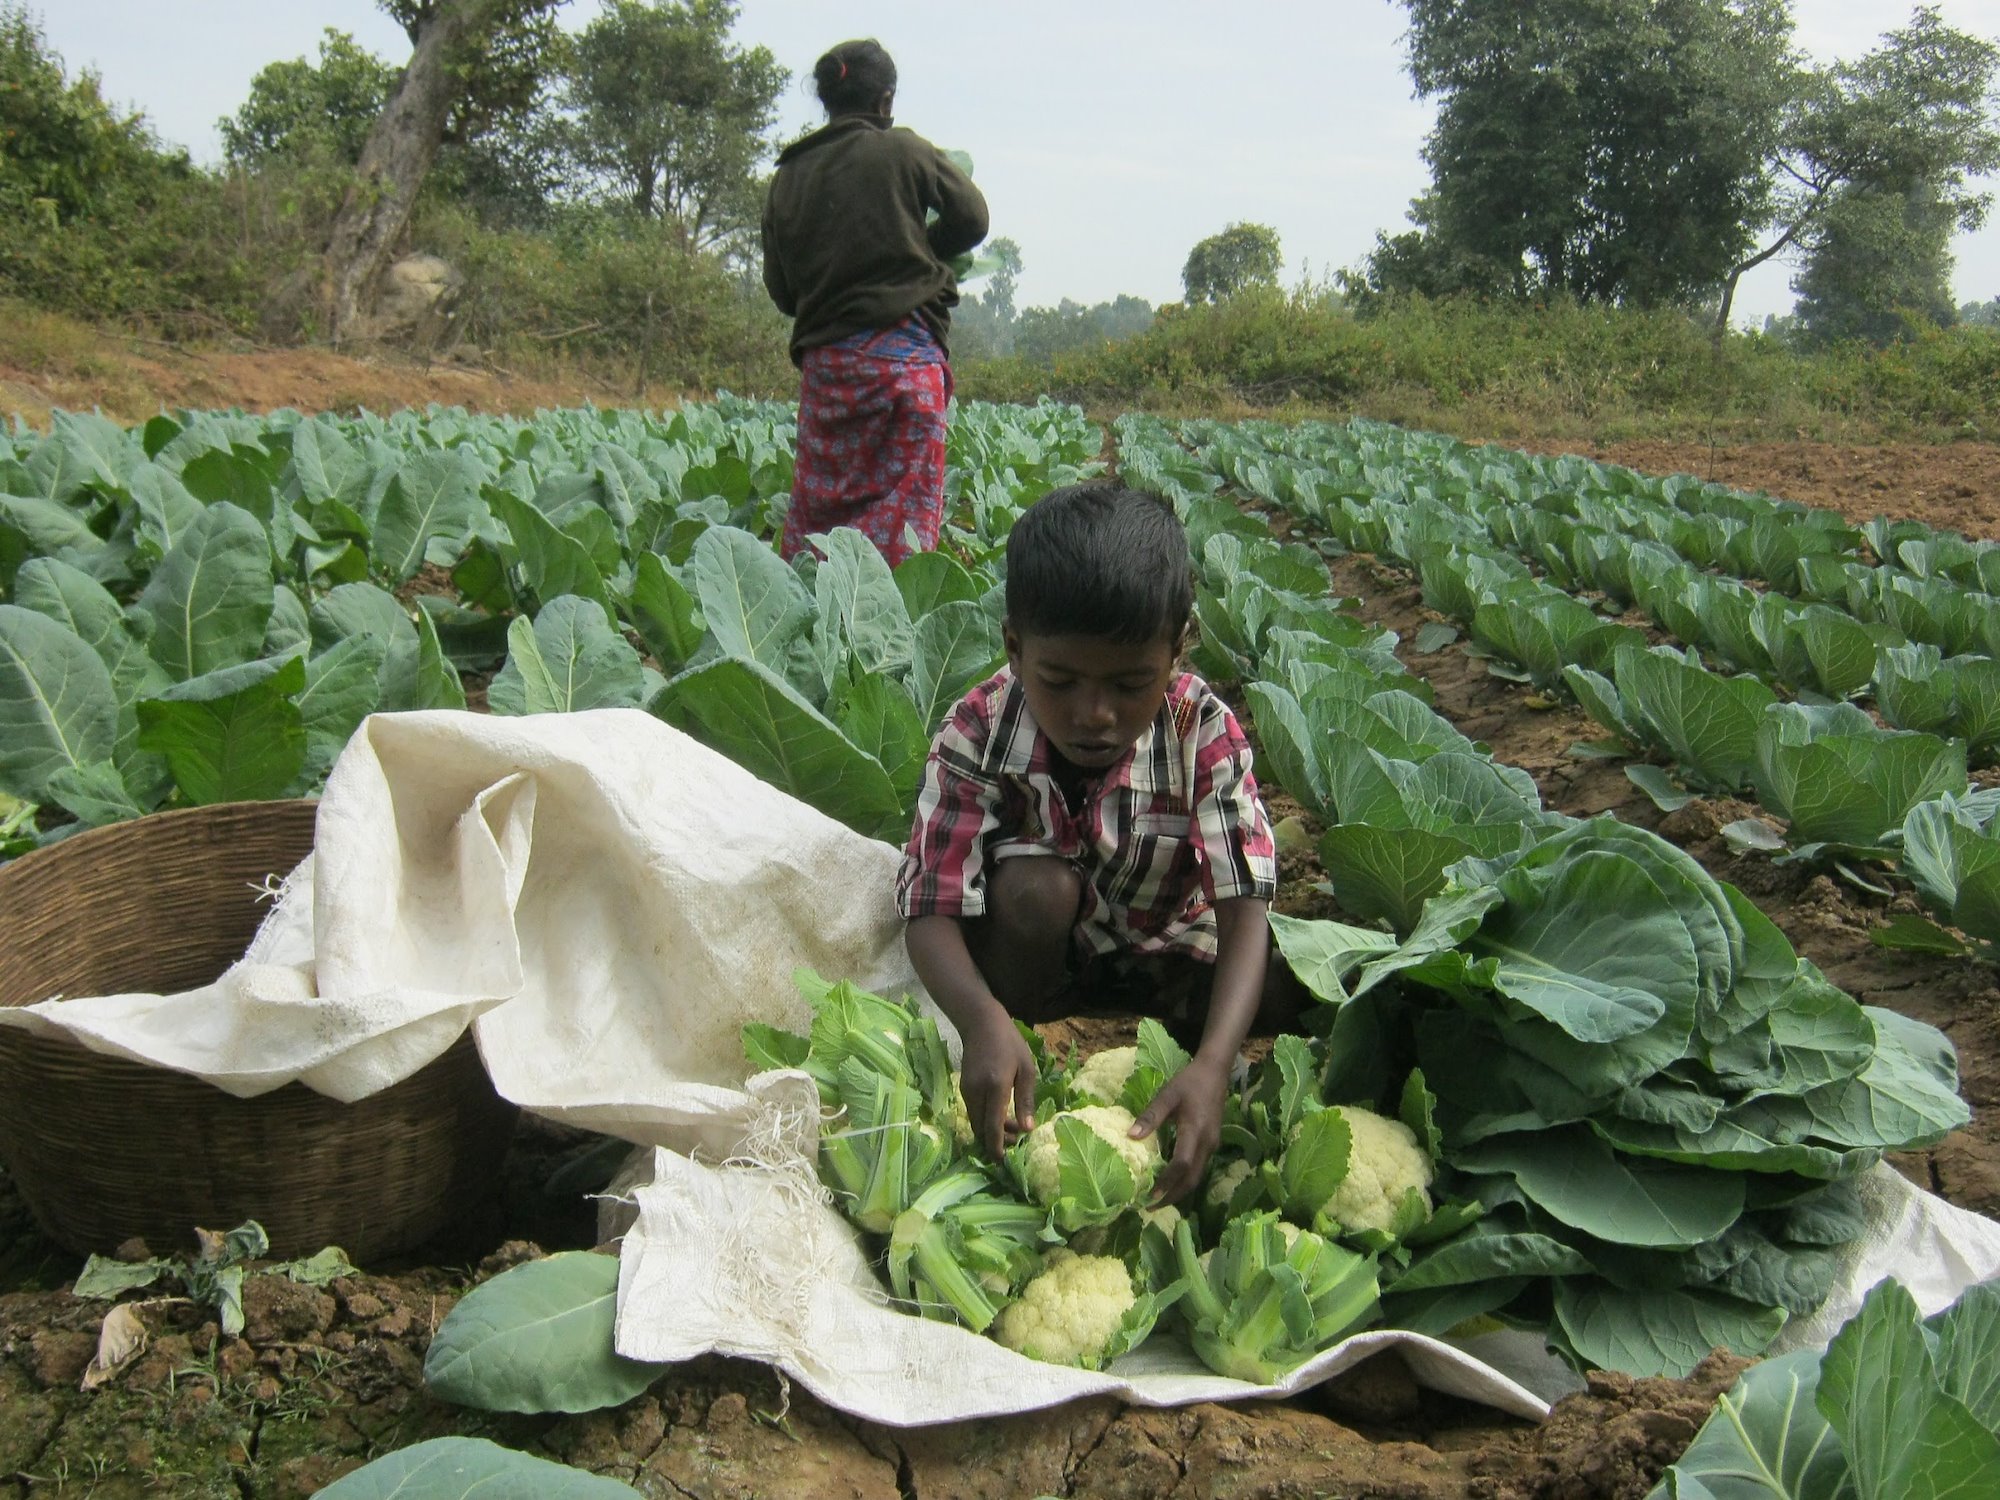 Young boy collecting cauliflowers from rows of crops